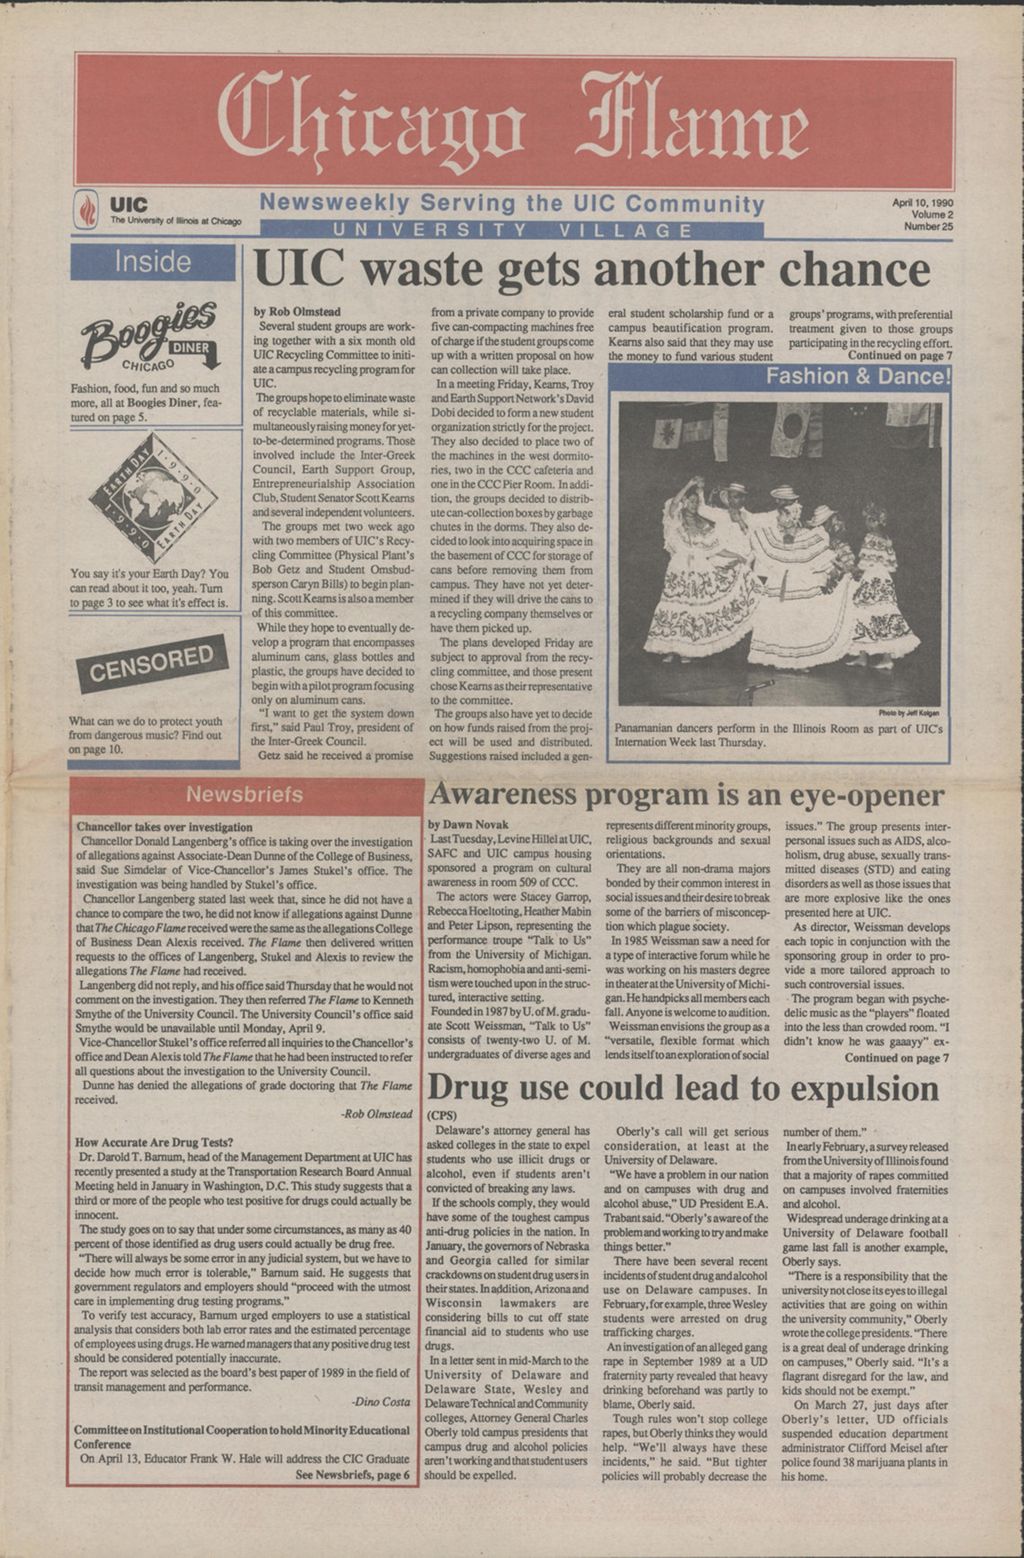 Miniature of Chicago Flame (April 10, 1990)